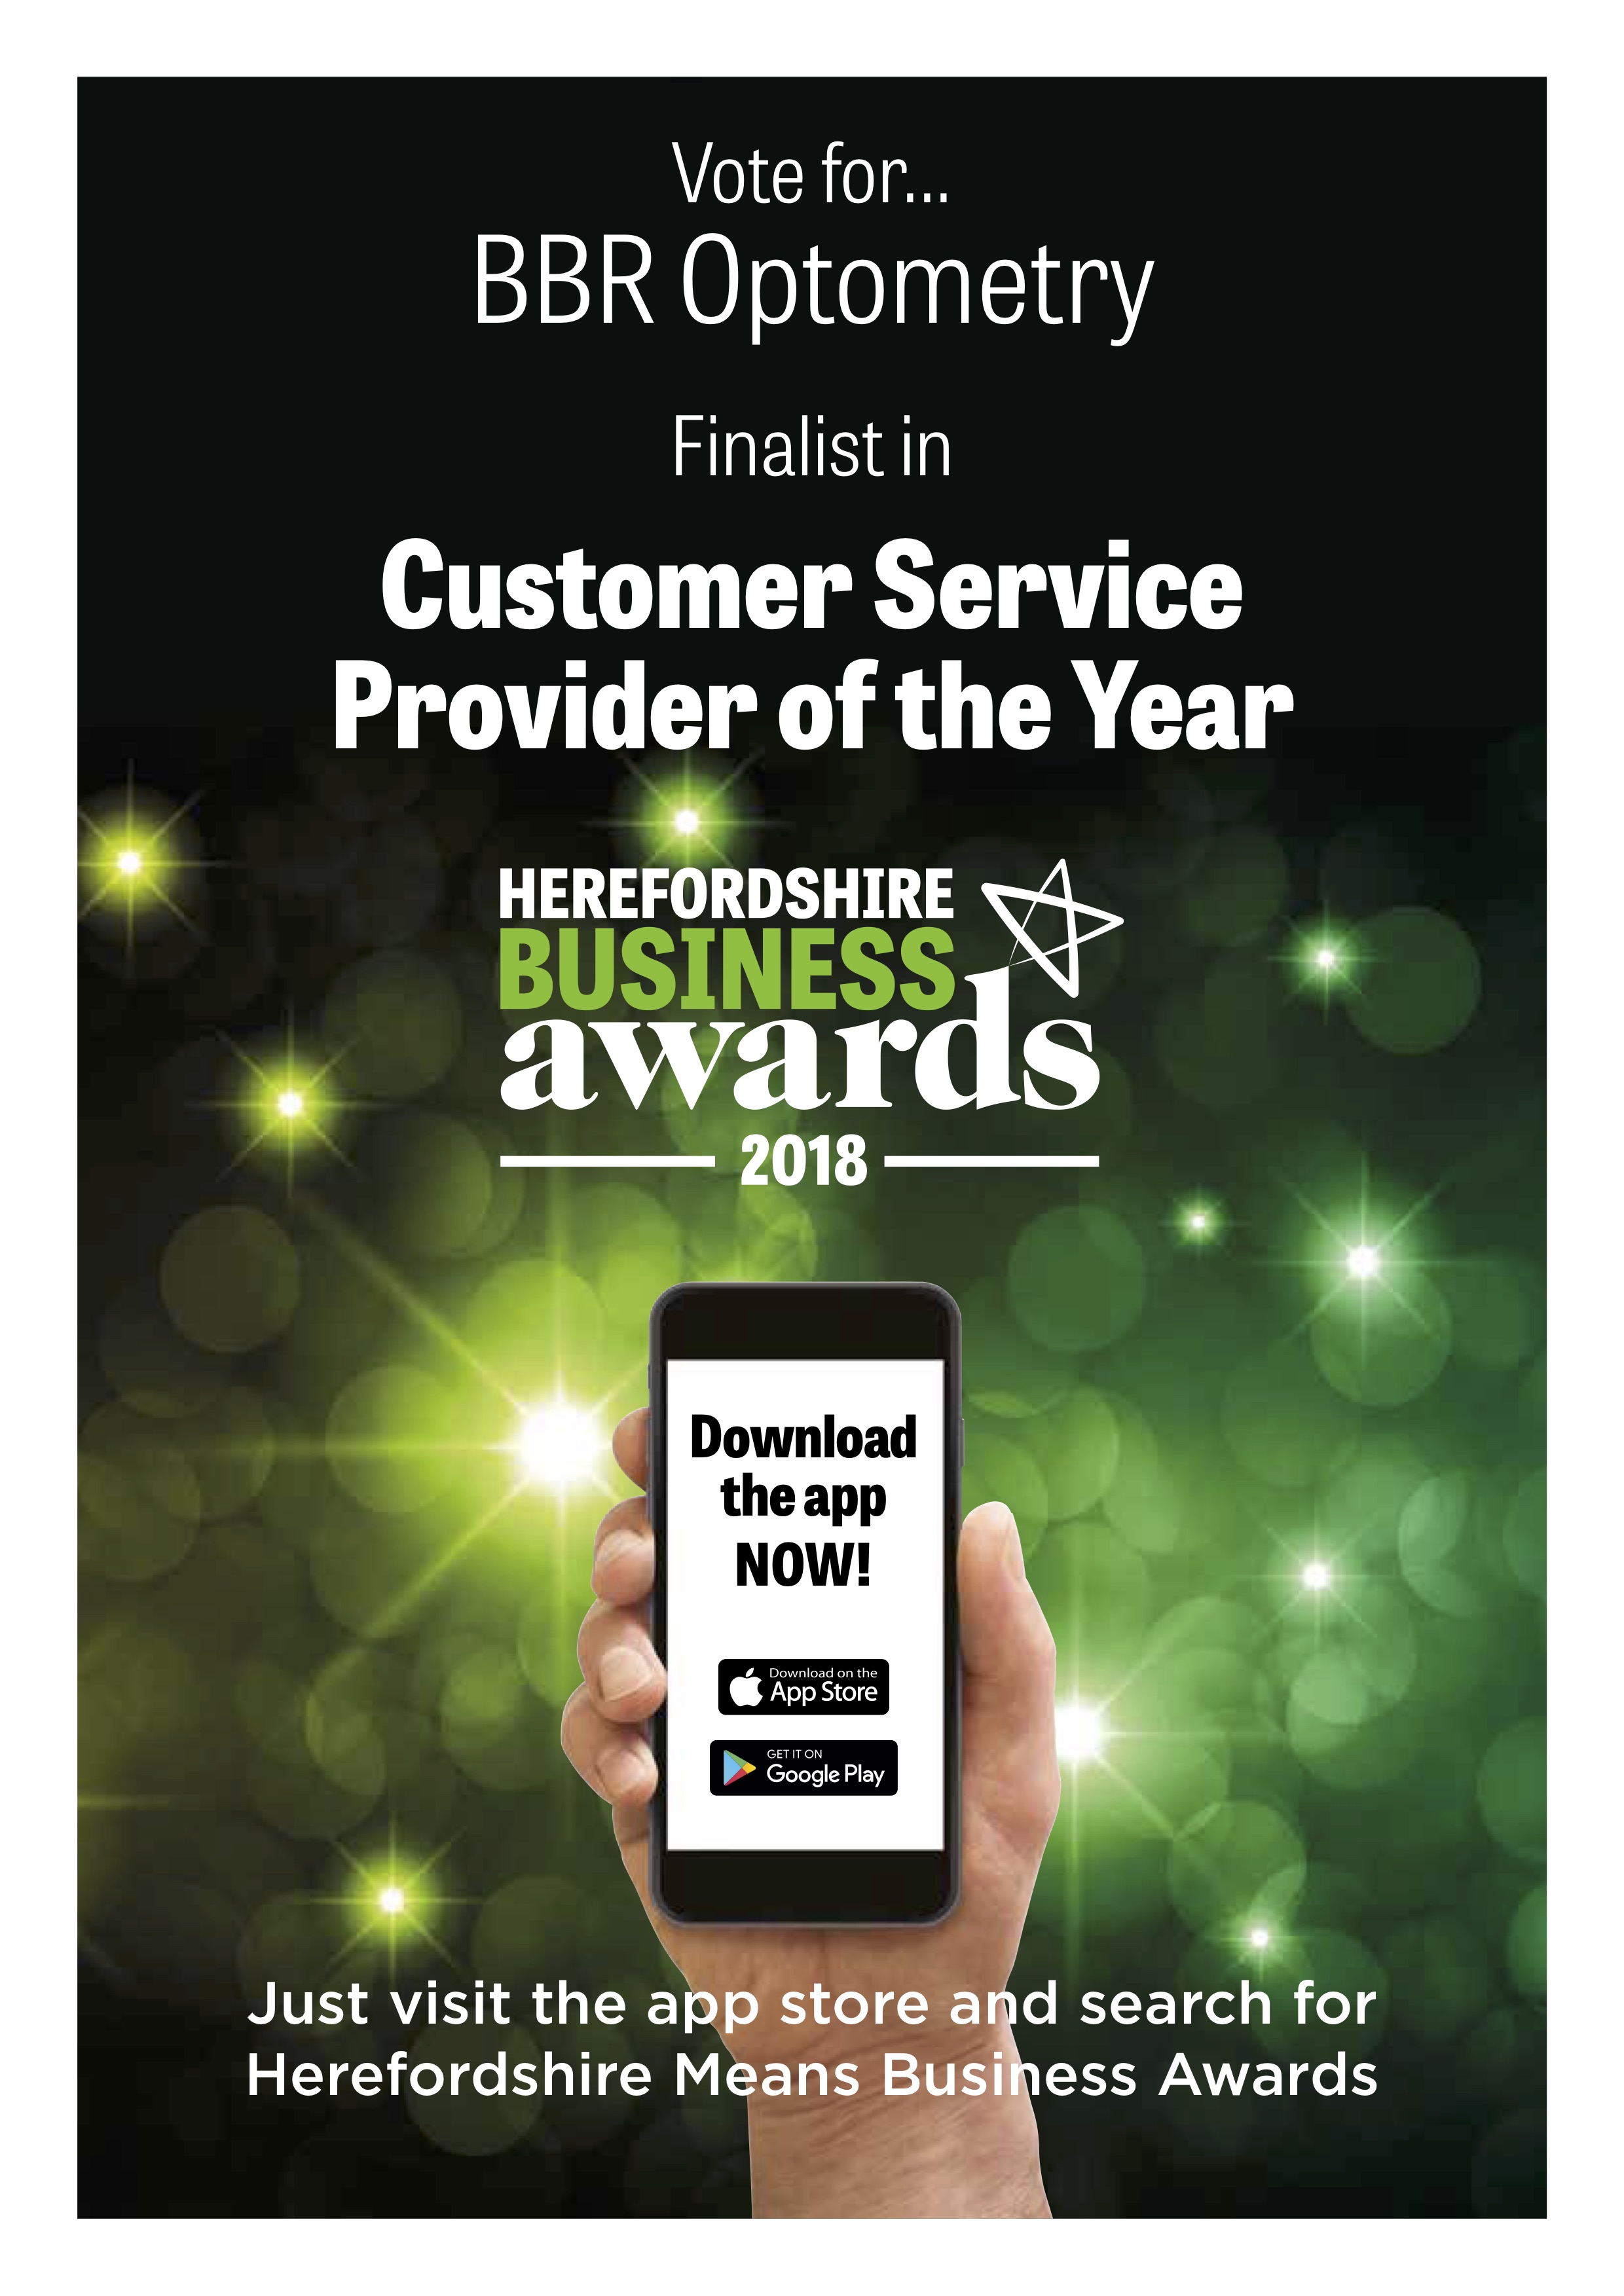 BBR shortlisted for two top business awards – vote for us now